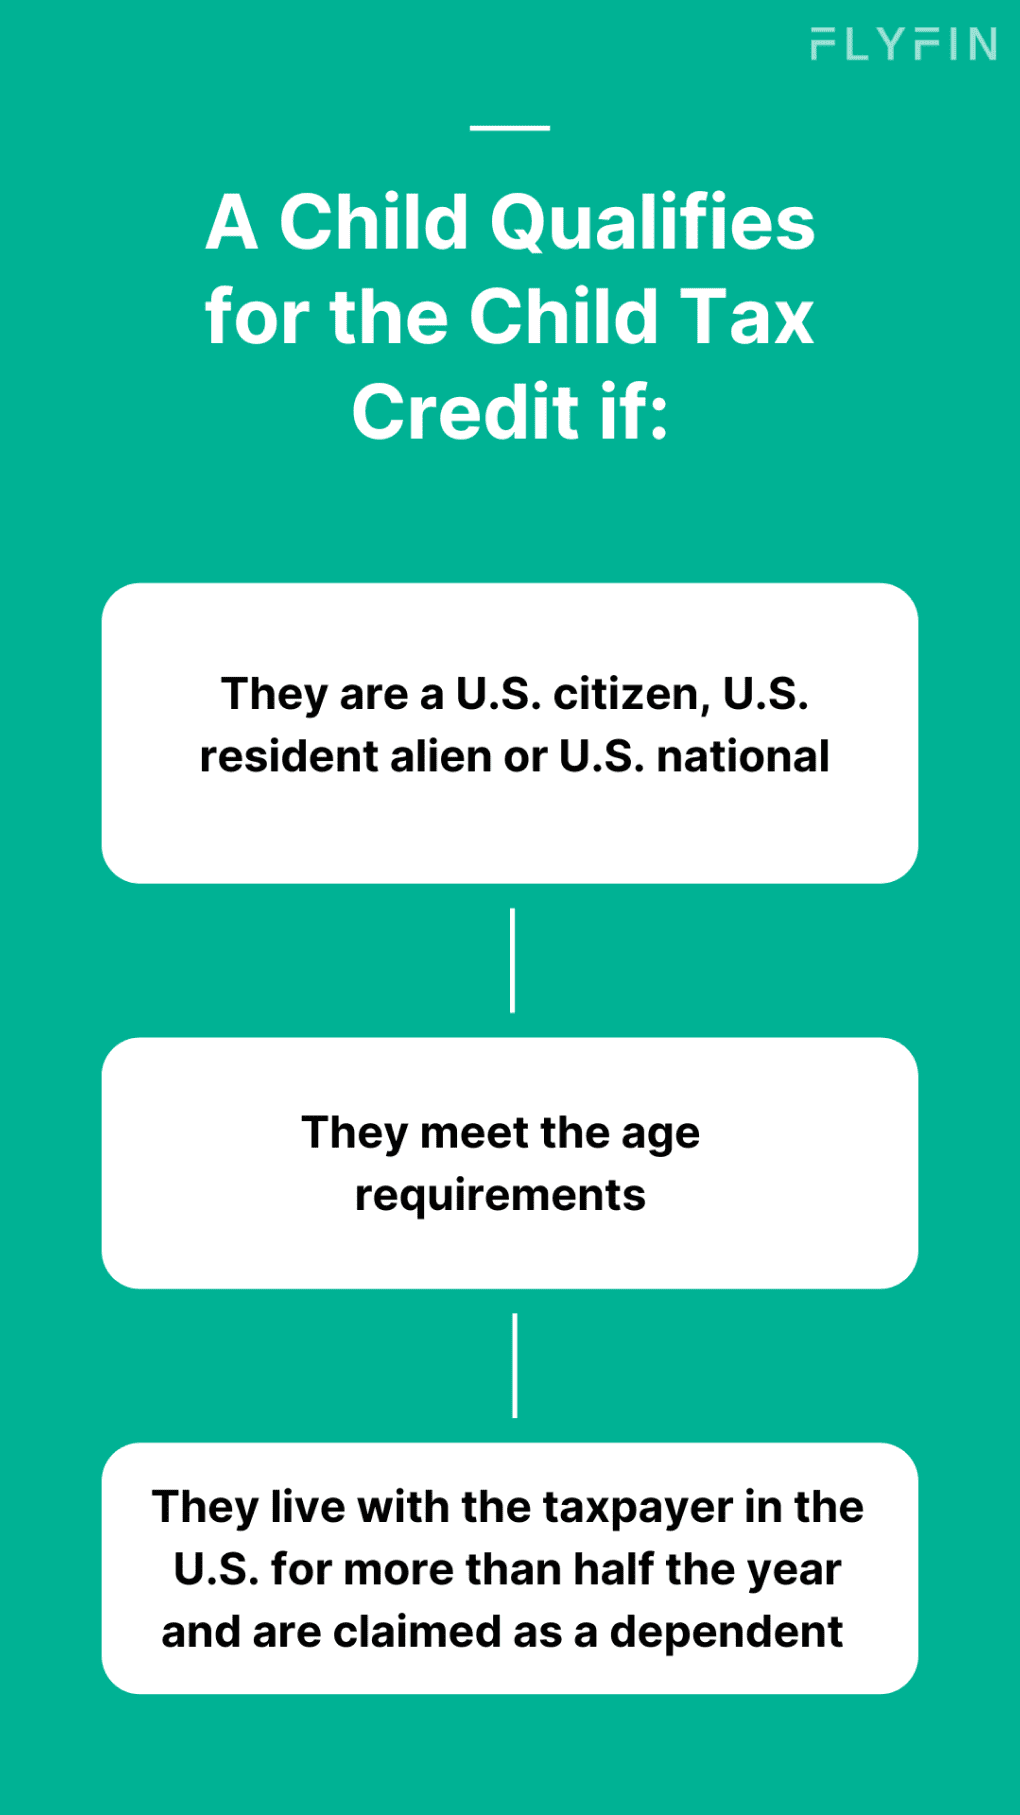 Image explaining the Child Tax Credit eligibility criteria for US citizens, residents and nationals based on age, living with taxpayer for more than half the year and being claimed as a dependent. No mention of self-employment, 1099, freelancer or taxes.